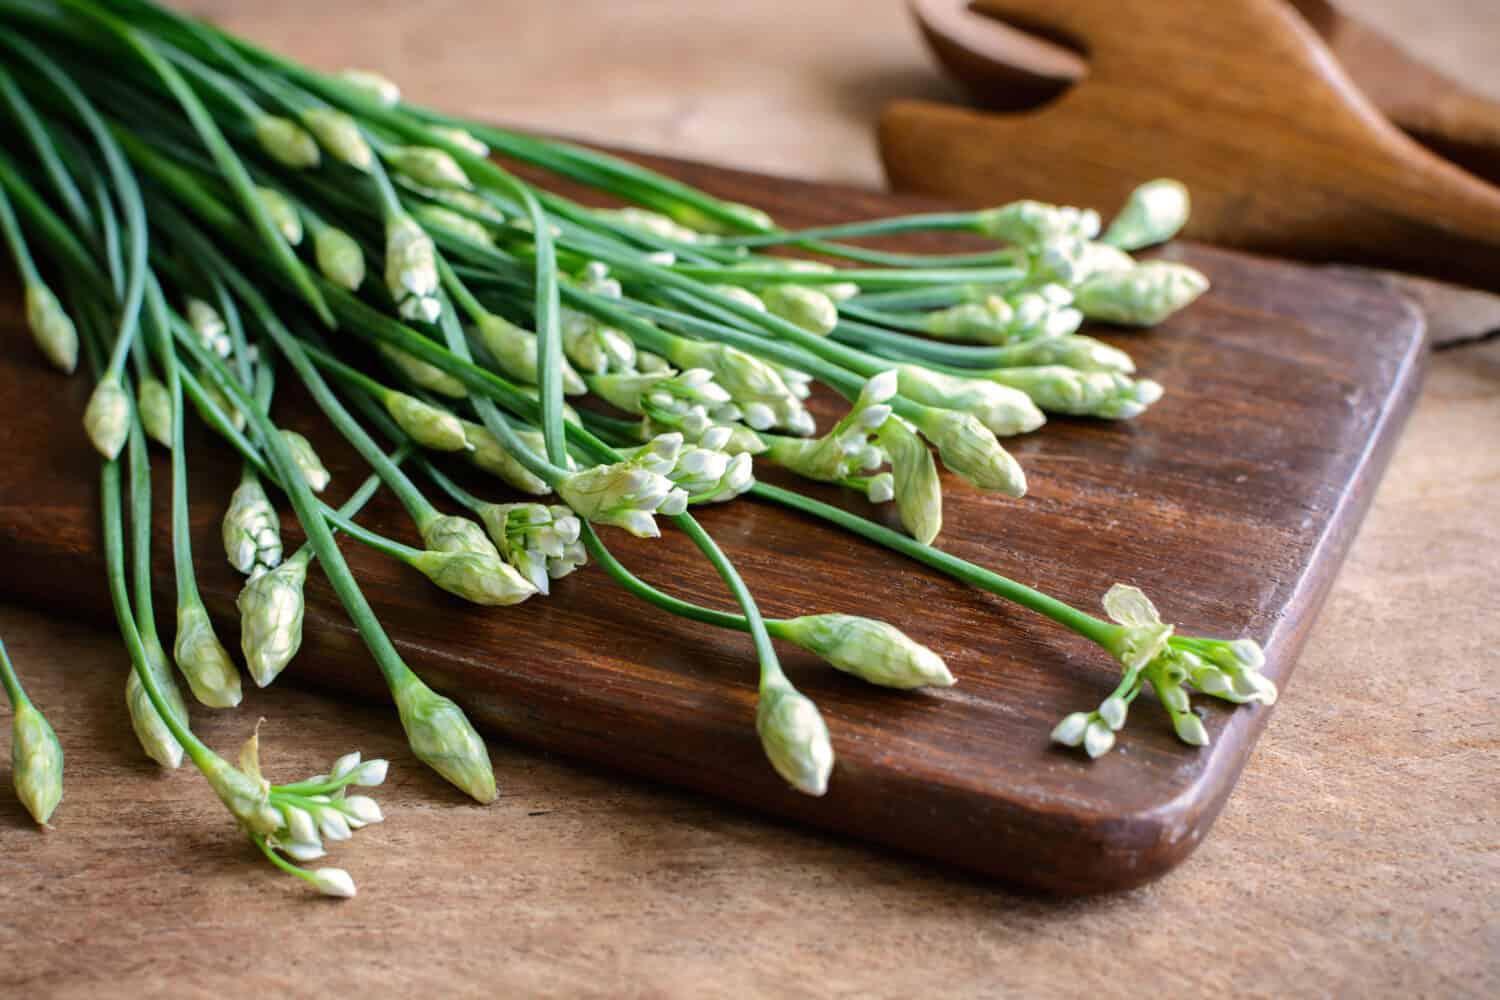 Garlic chives or Allium tuberosum on wooden table background